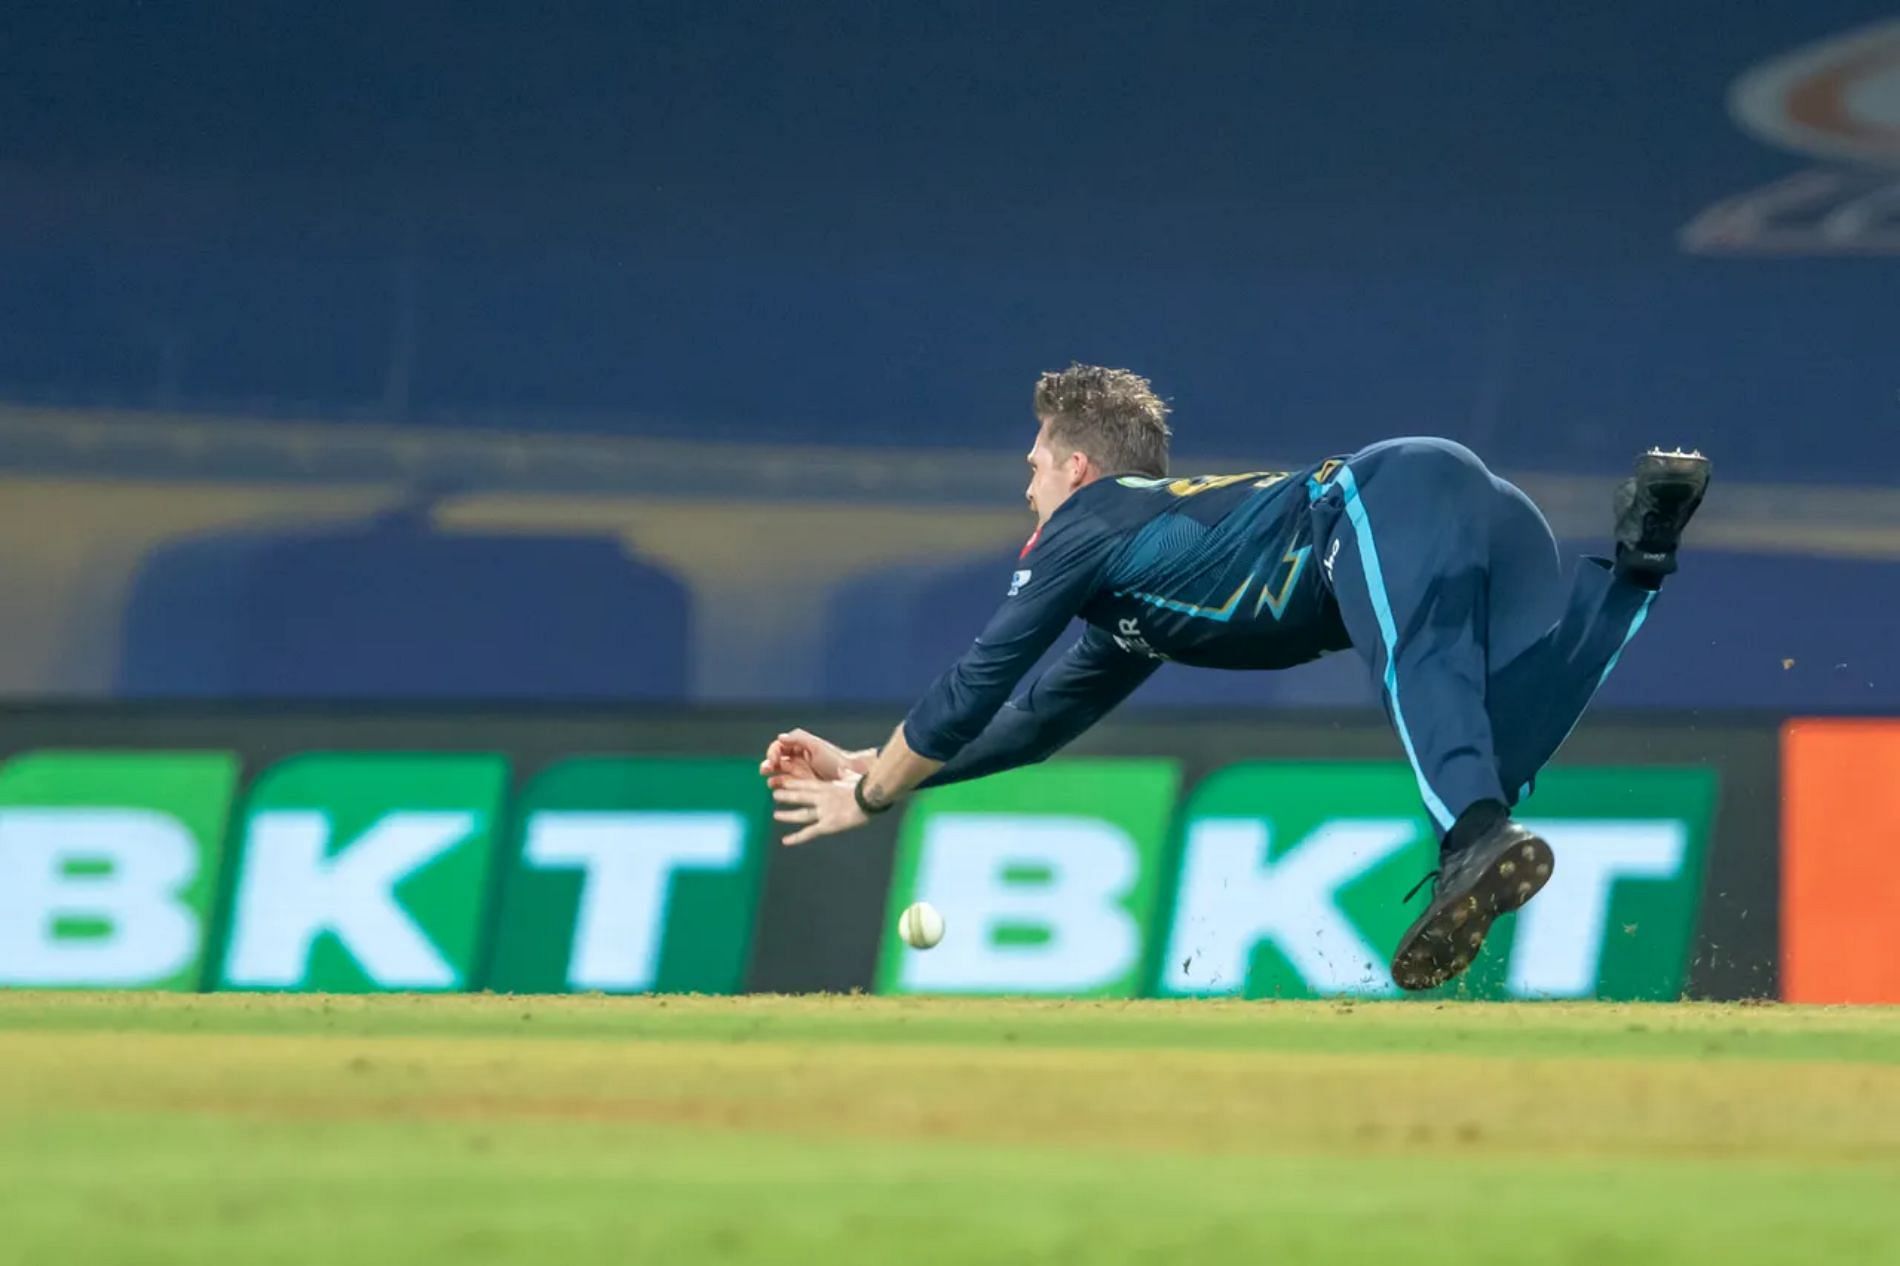 GT pacer Lockie Ferguson attempts to pull off a diving catch off his own bowling against SRH in Match 21. He dropped the ball but the cameras caught him in a rather interesting posture.